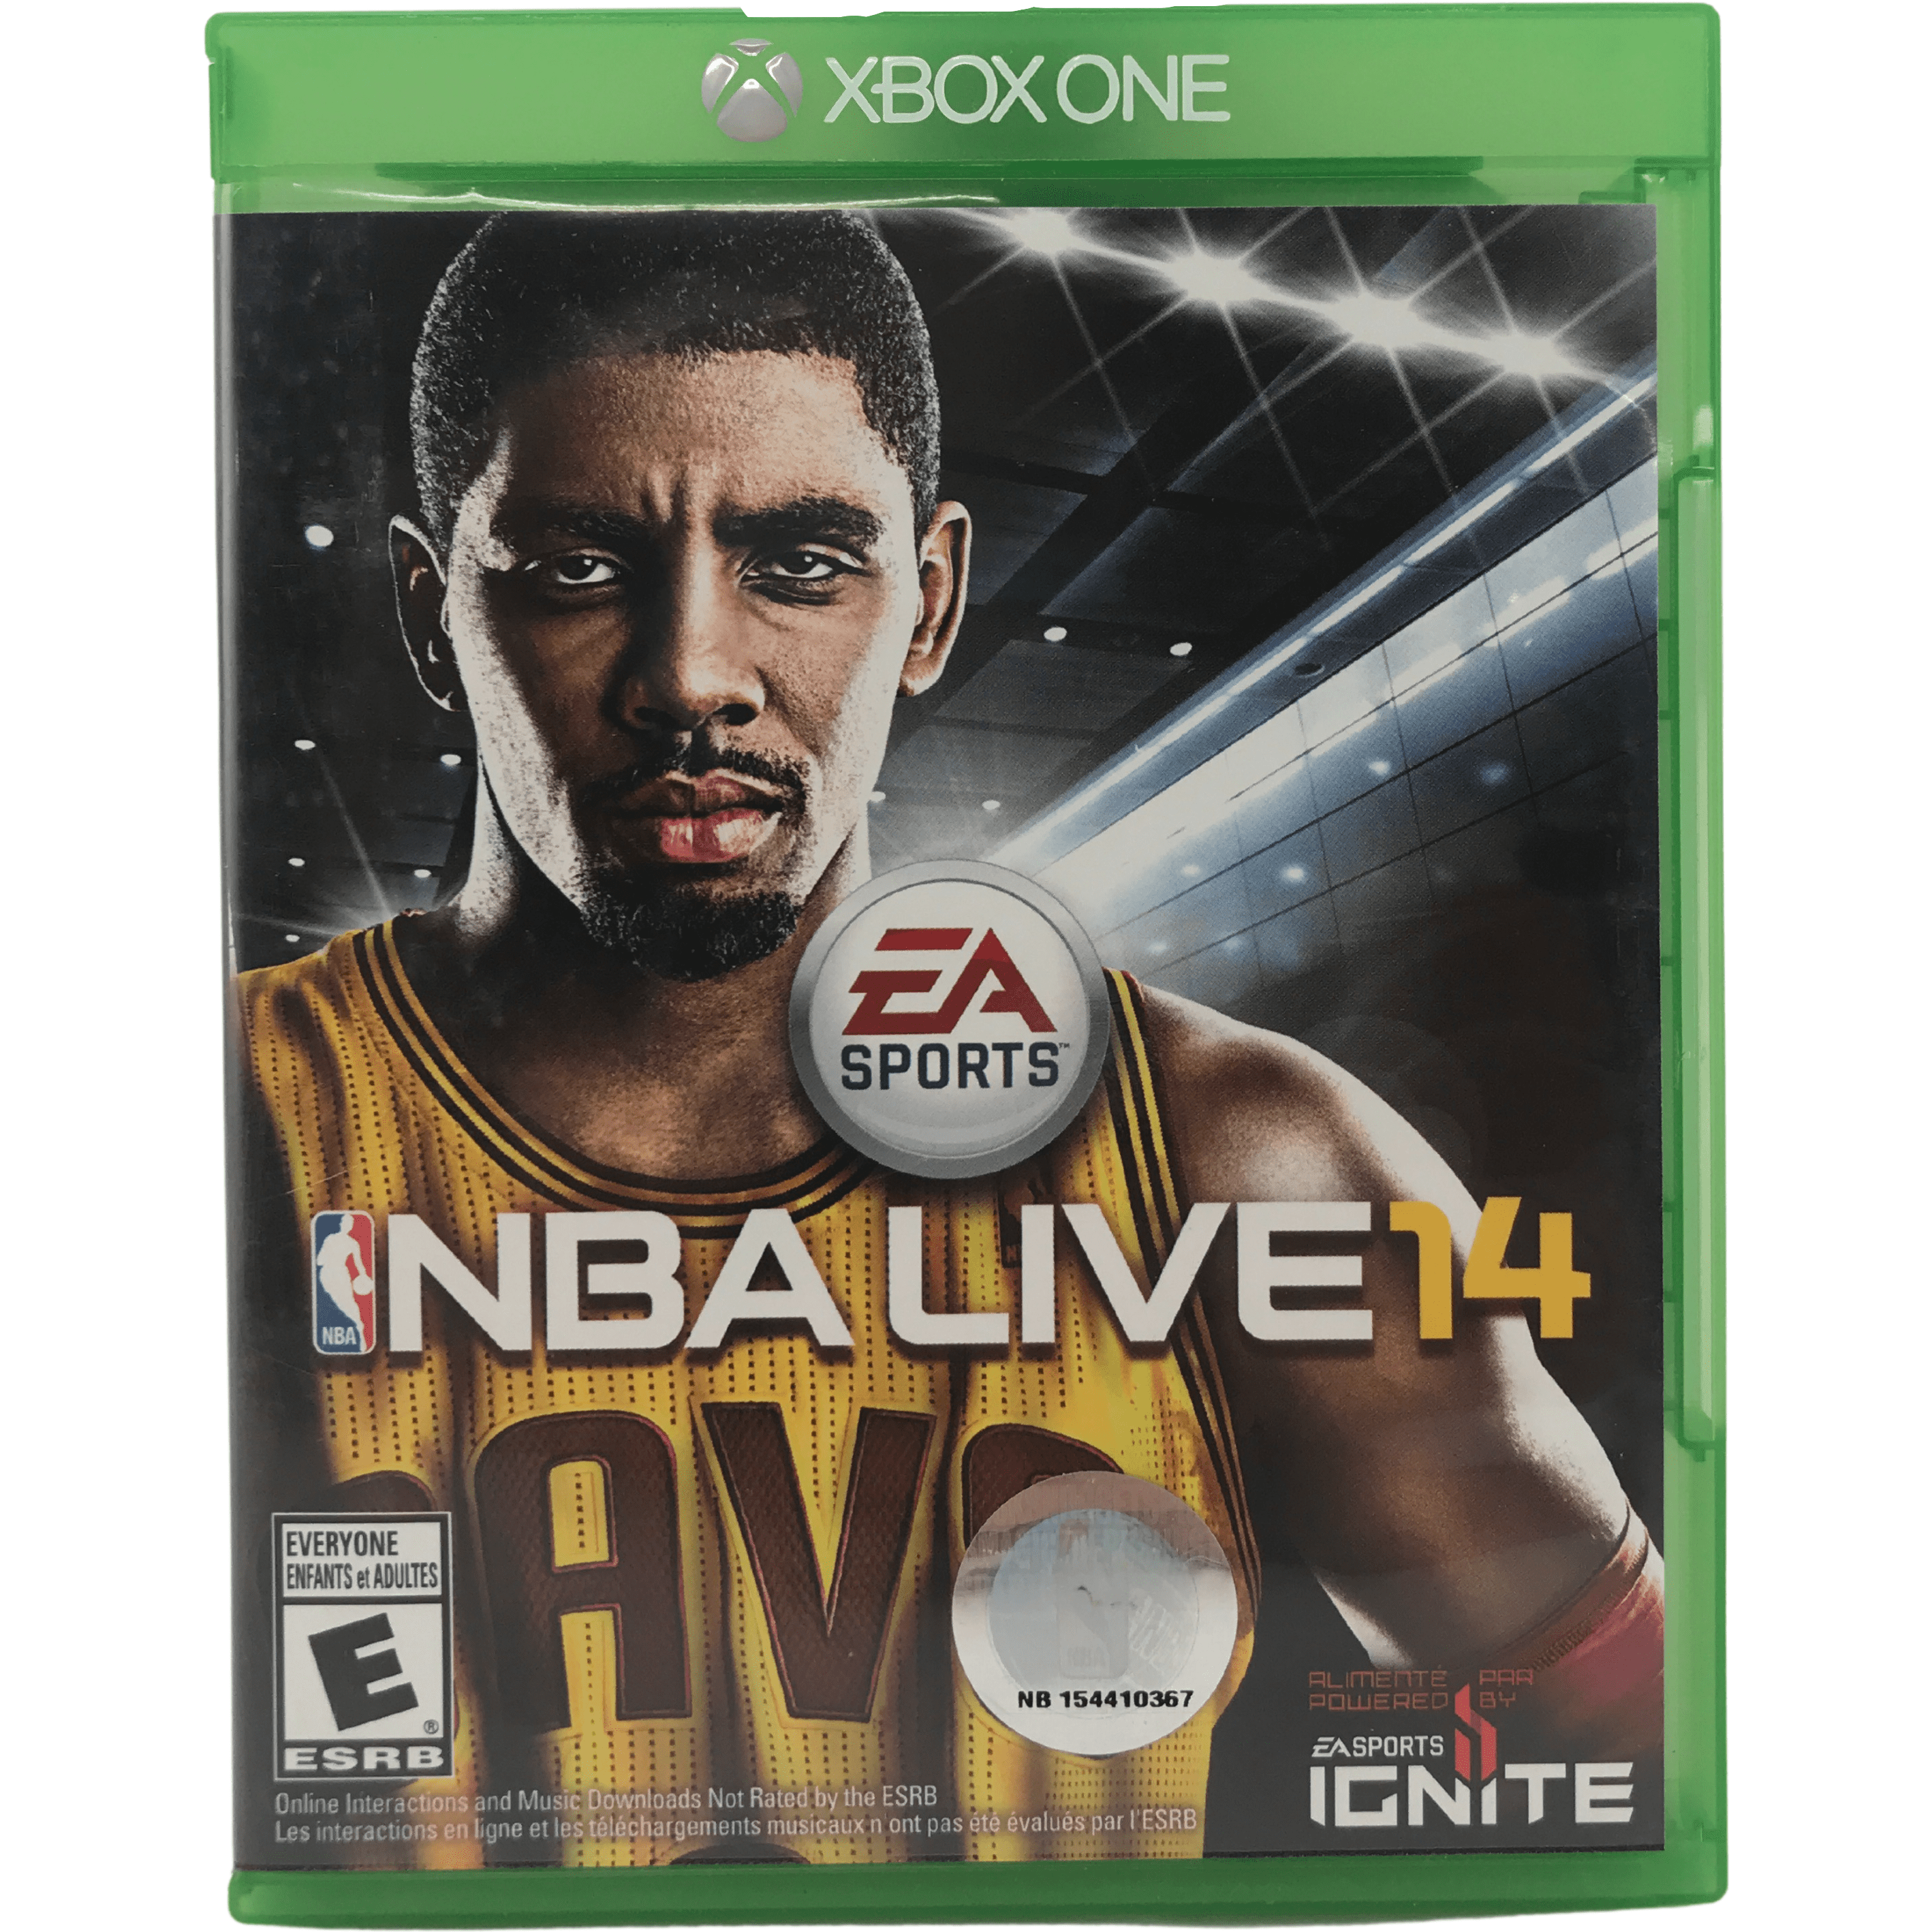 Xbox One "NBA Live 14" Game: Video Game: Opened